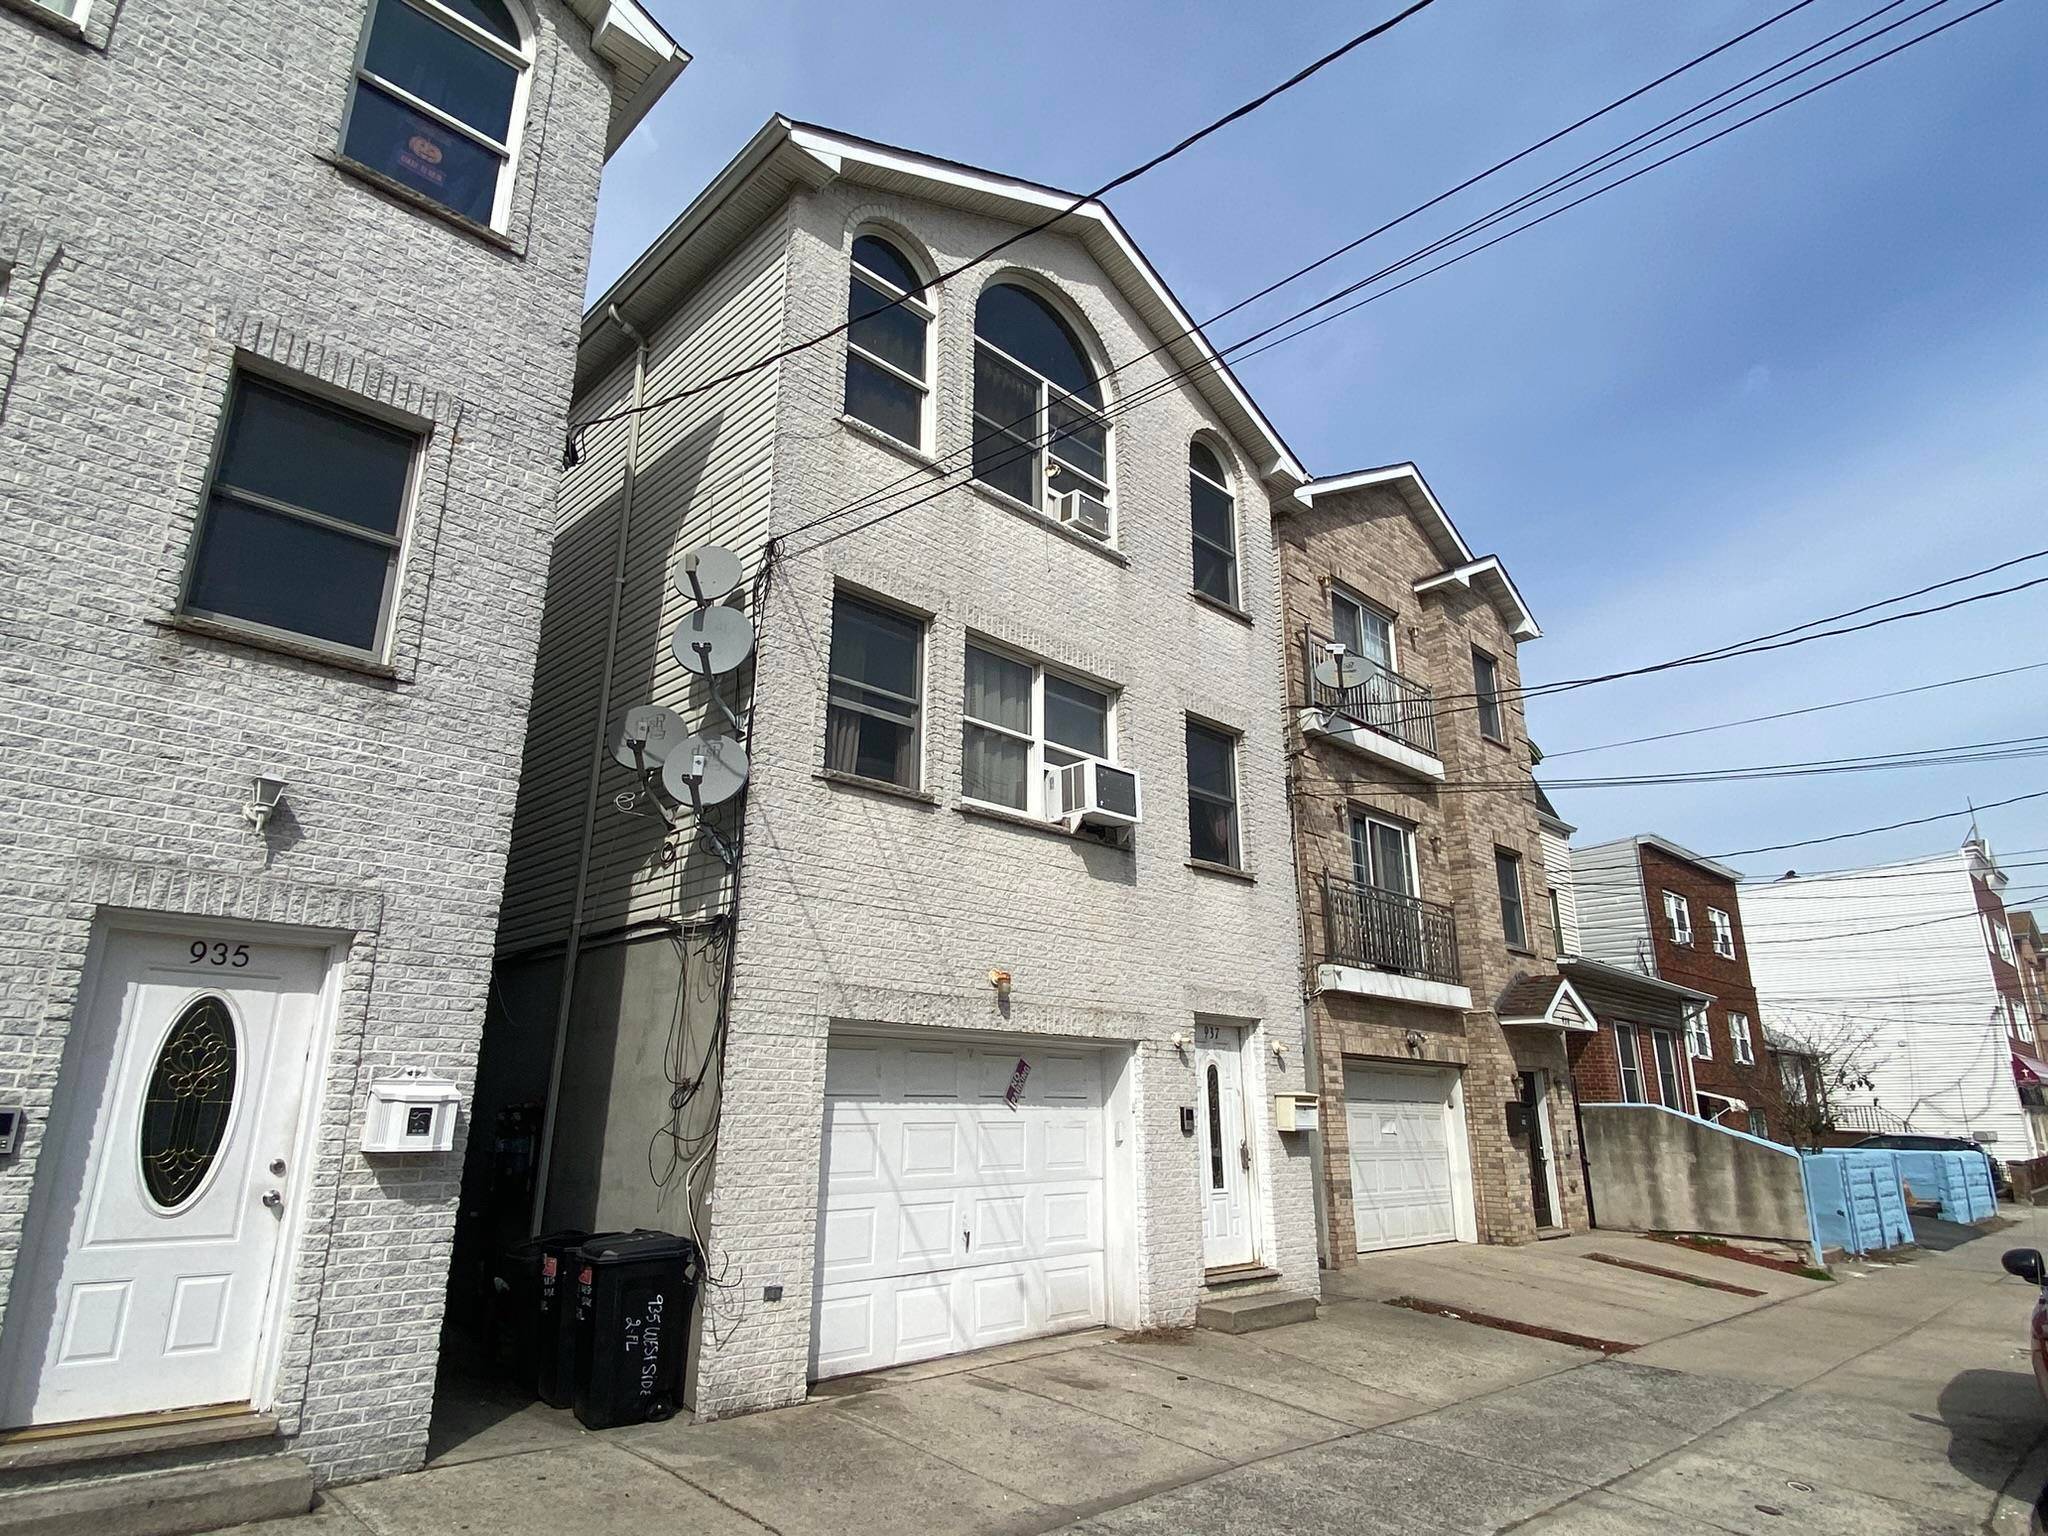 937 WEST SIDE AVE Multi-Family New Jersey